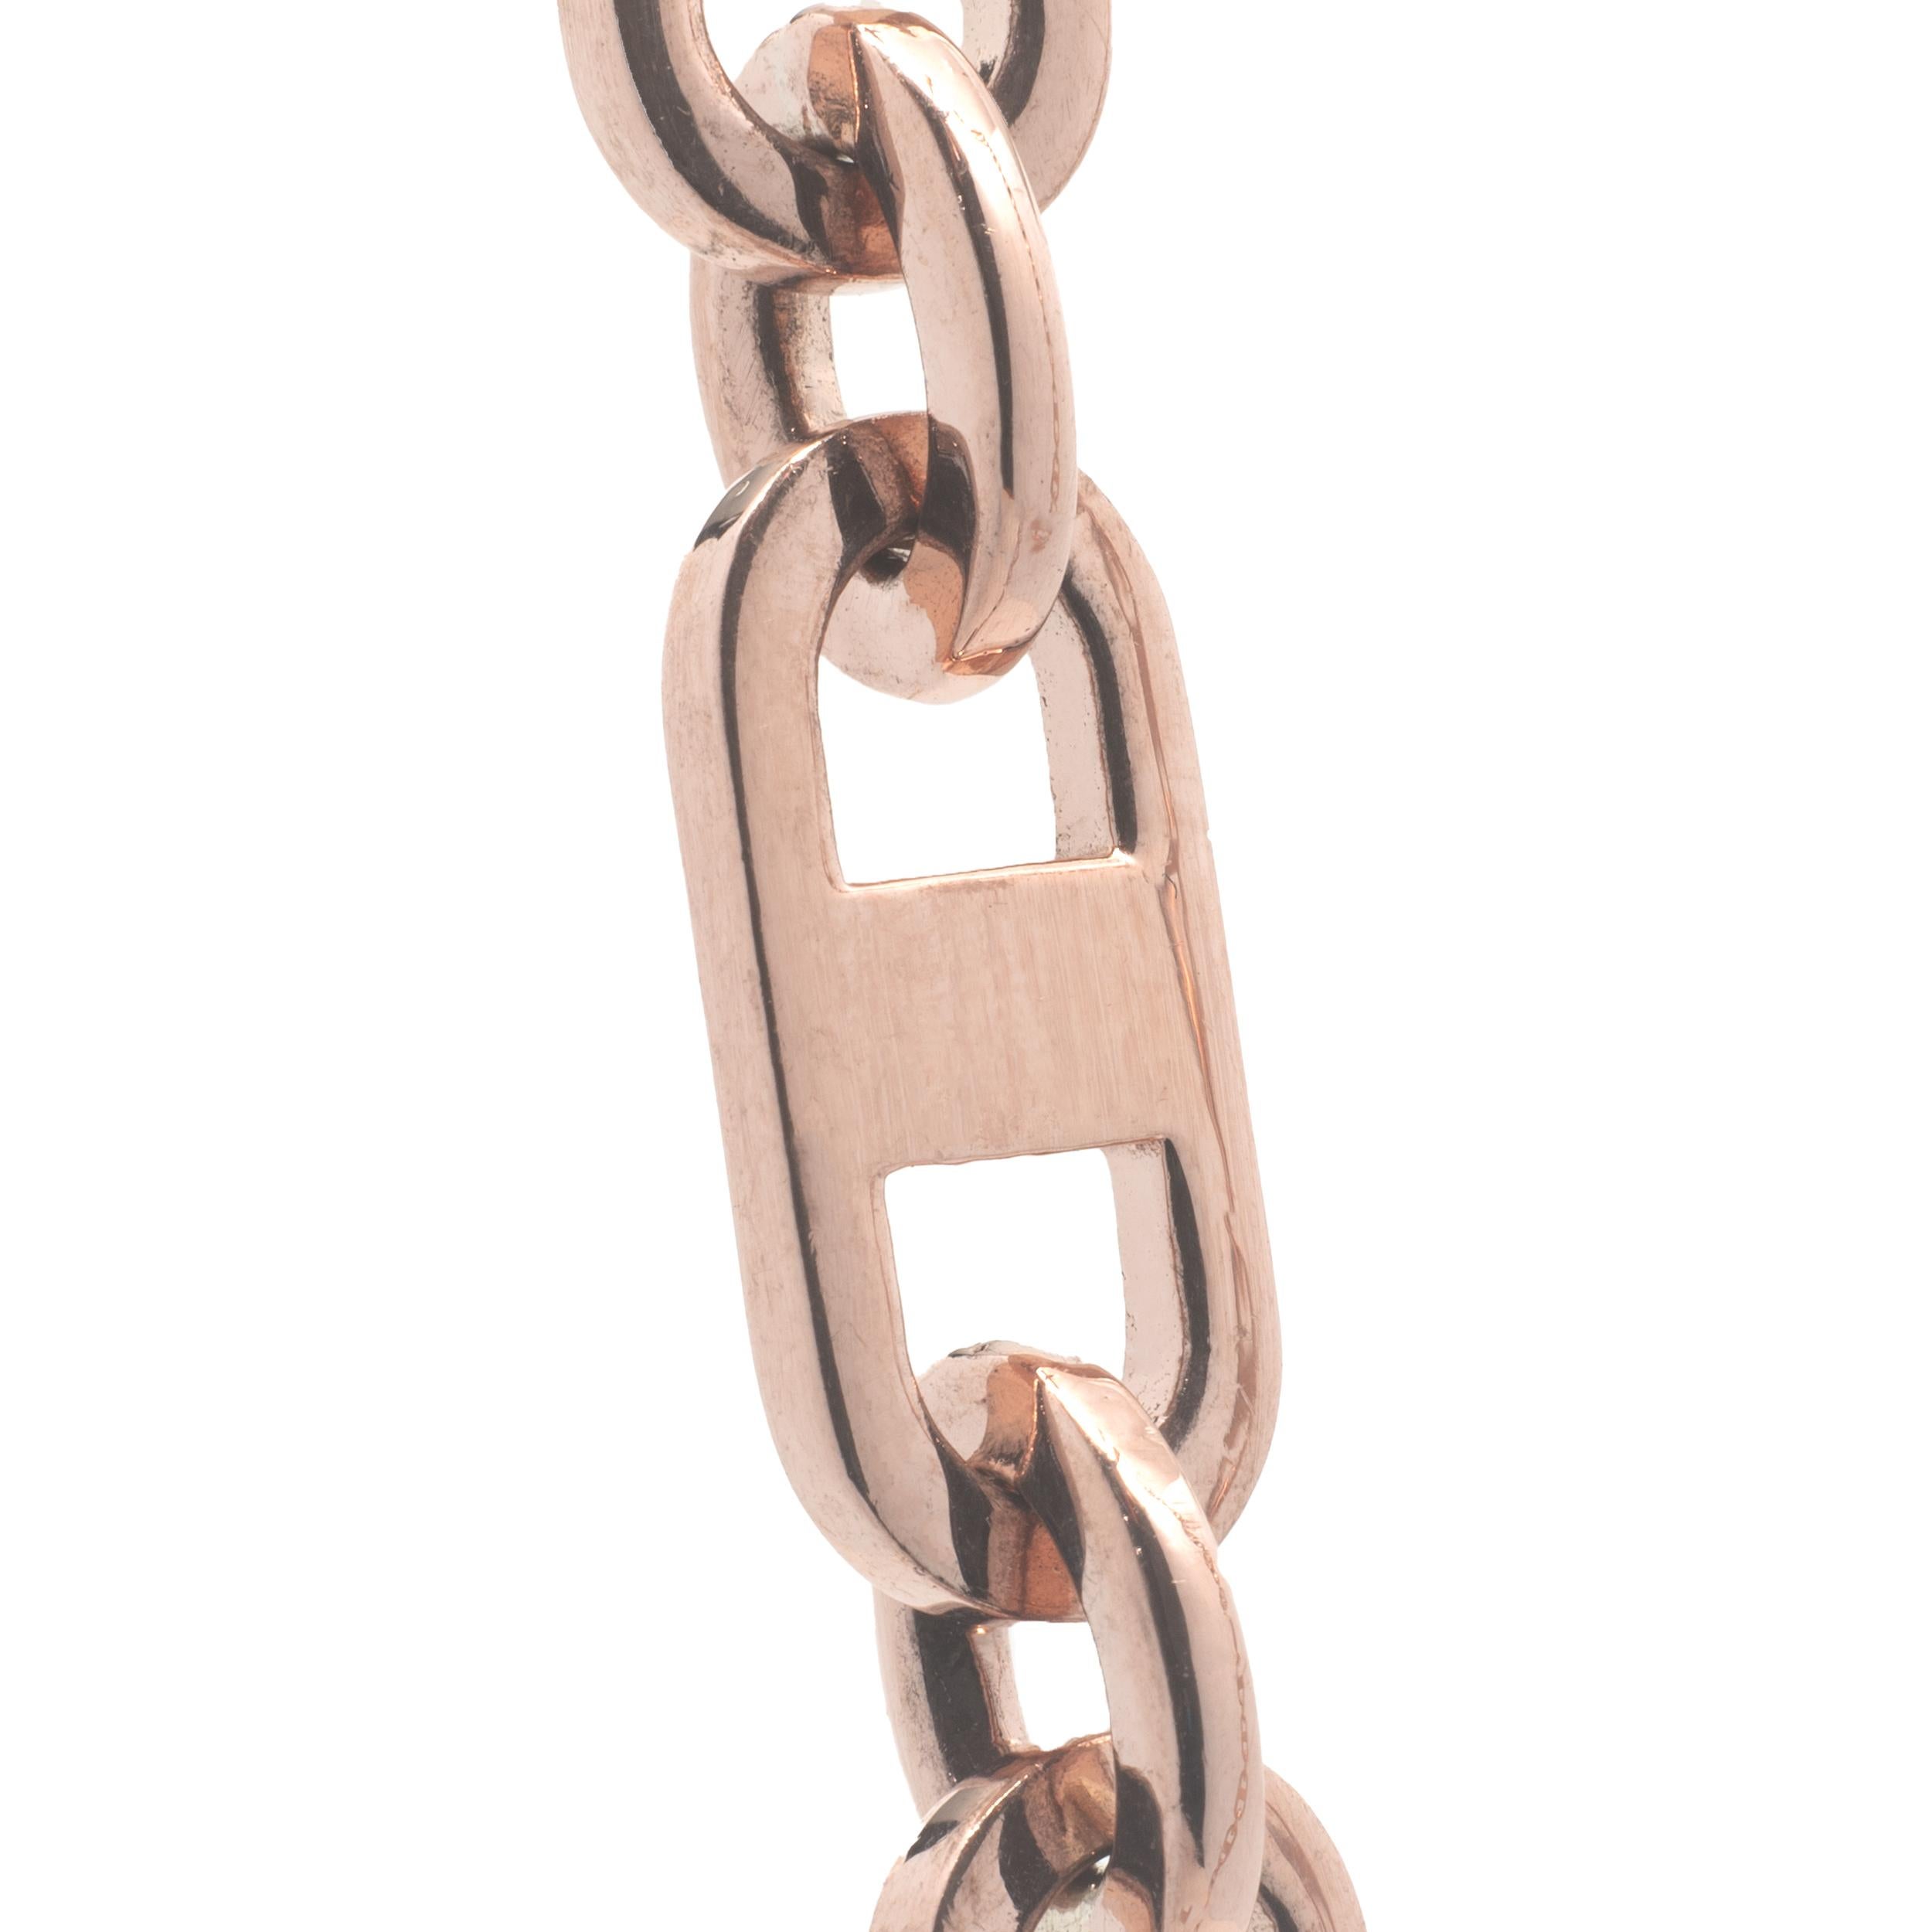 Material: 14K rose gold
Dimensions: necklace measures 24-inches in length, 7.60mm wide
Weight: 80.80 grams
